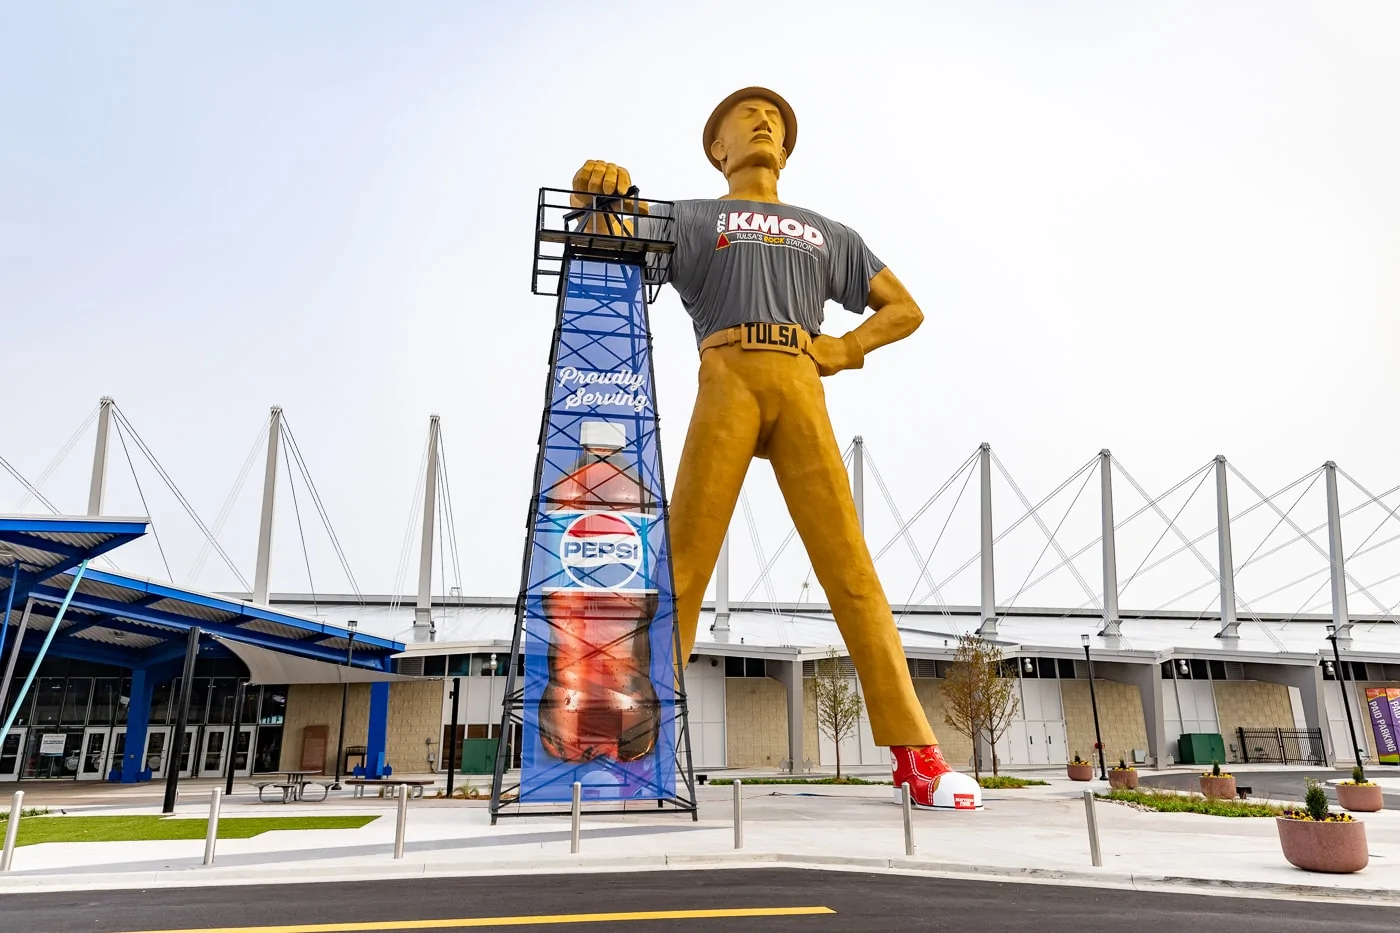 The Golden Driller in Tulsa, Oklahoma roadside attraction on Route 66